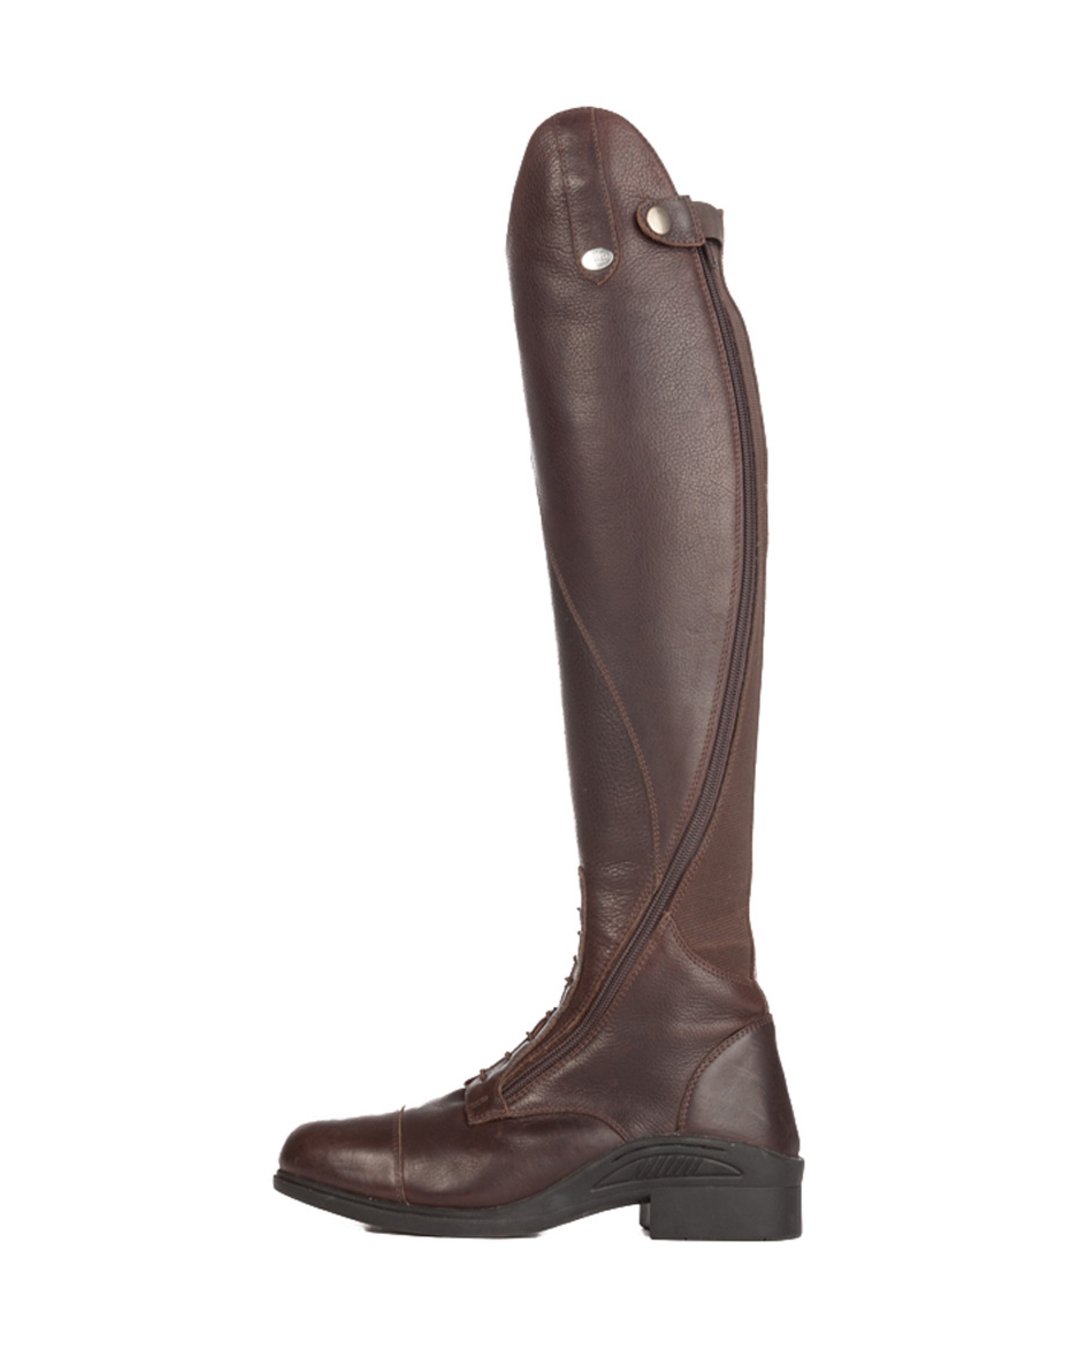 Reitstiefel Proximo Braun 39 SLL